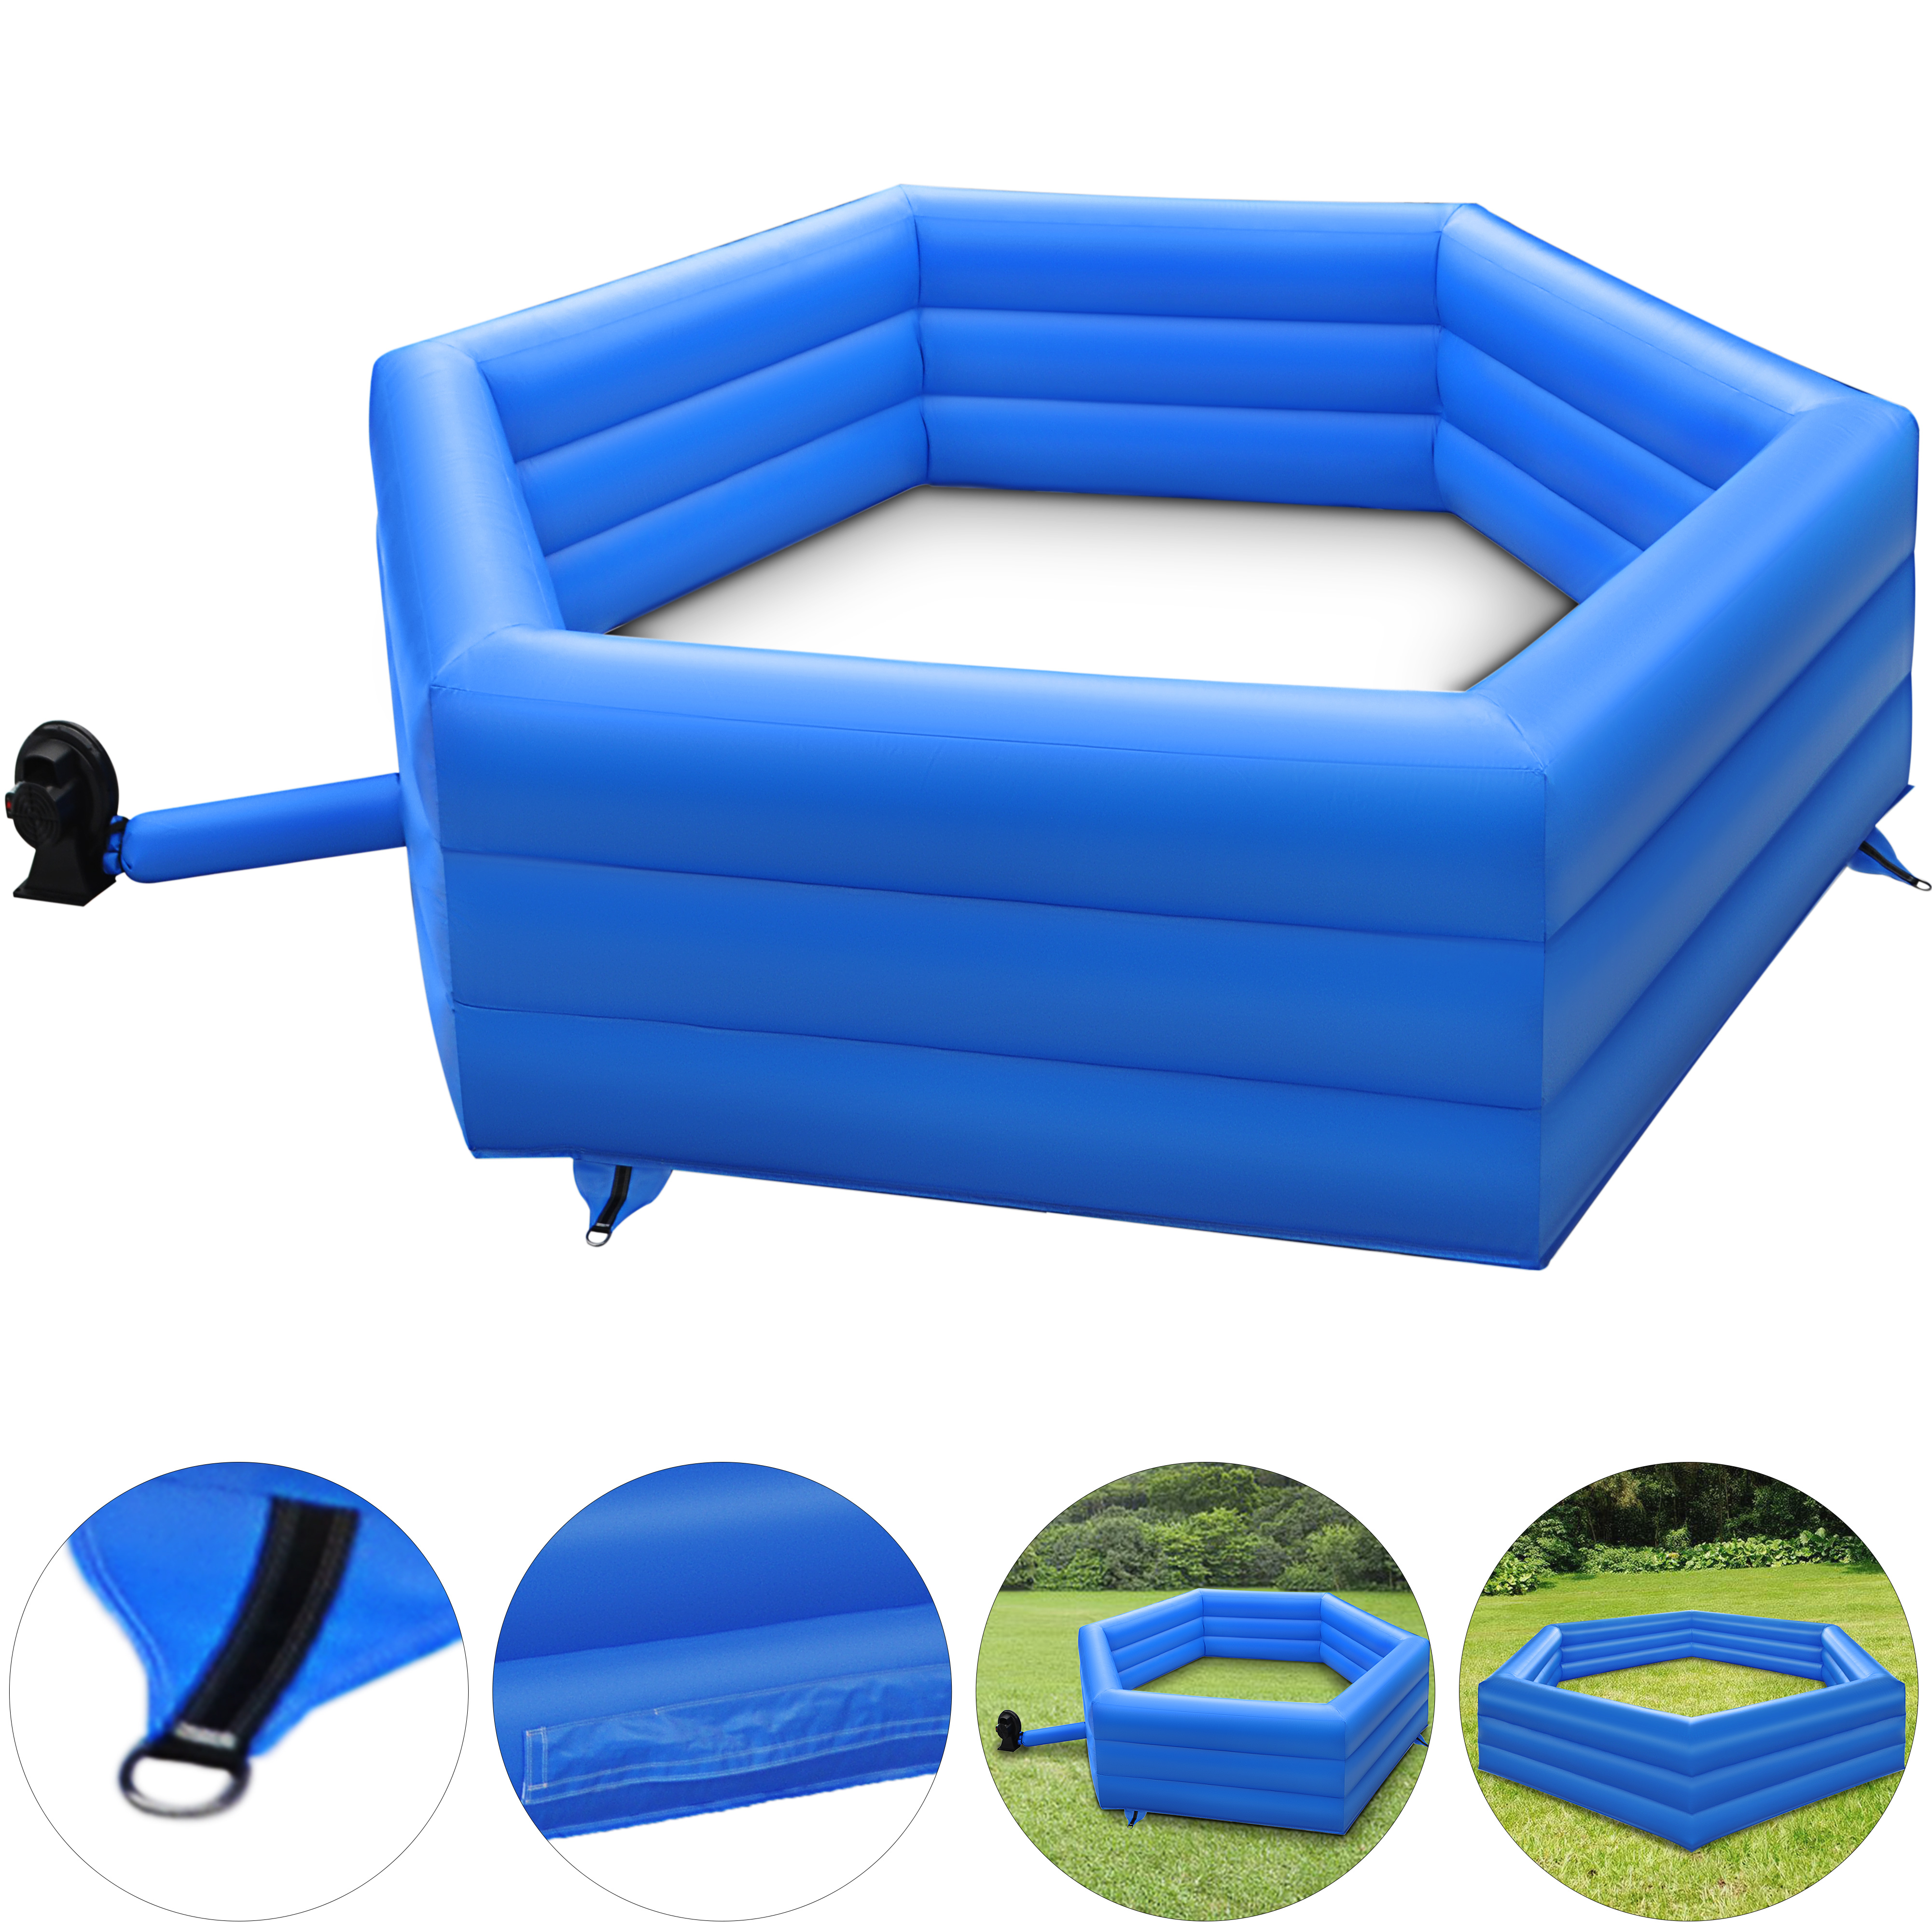 Gaga Ball Pit Inflatable Xl 20' Gagaball Court W Electric Air Pump - Inflates In от Vevor Many GEOs